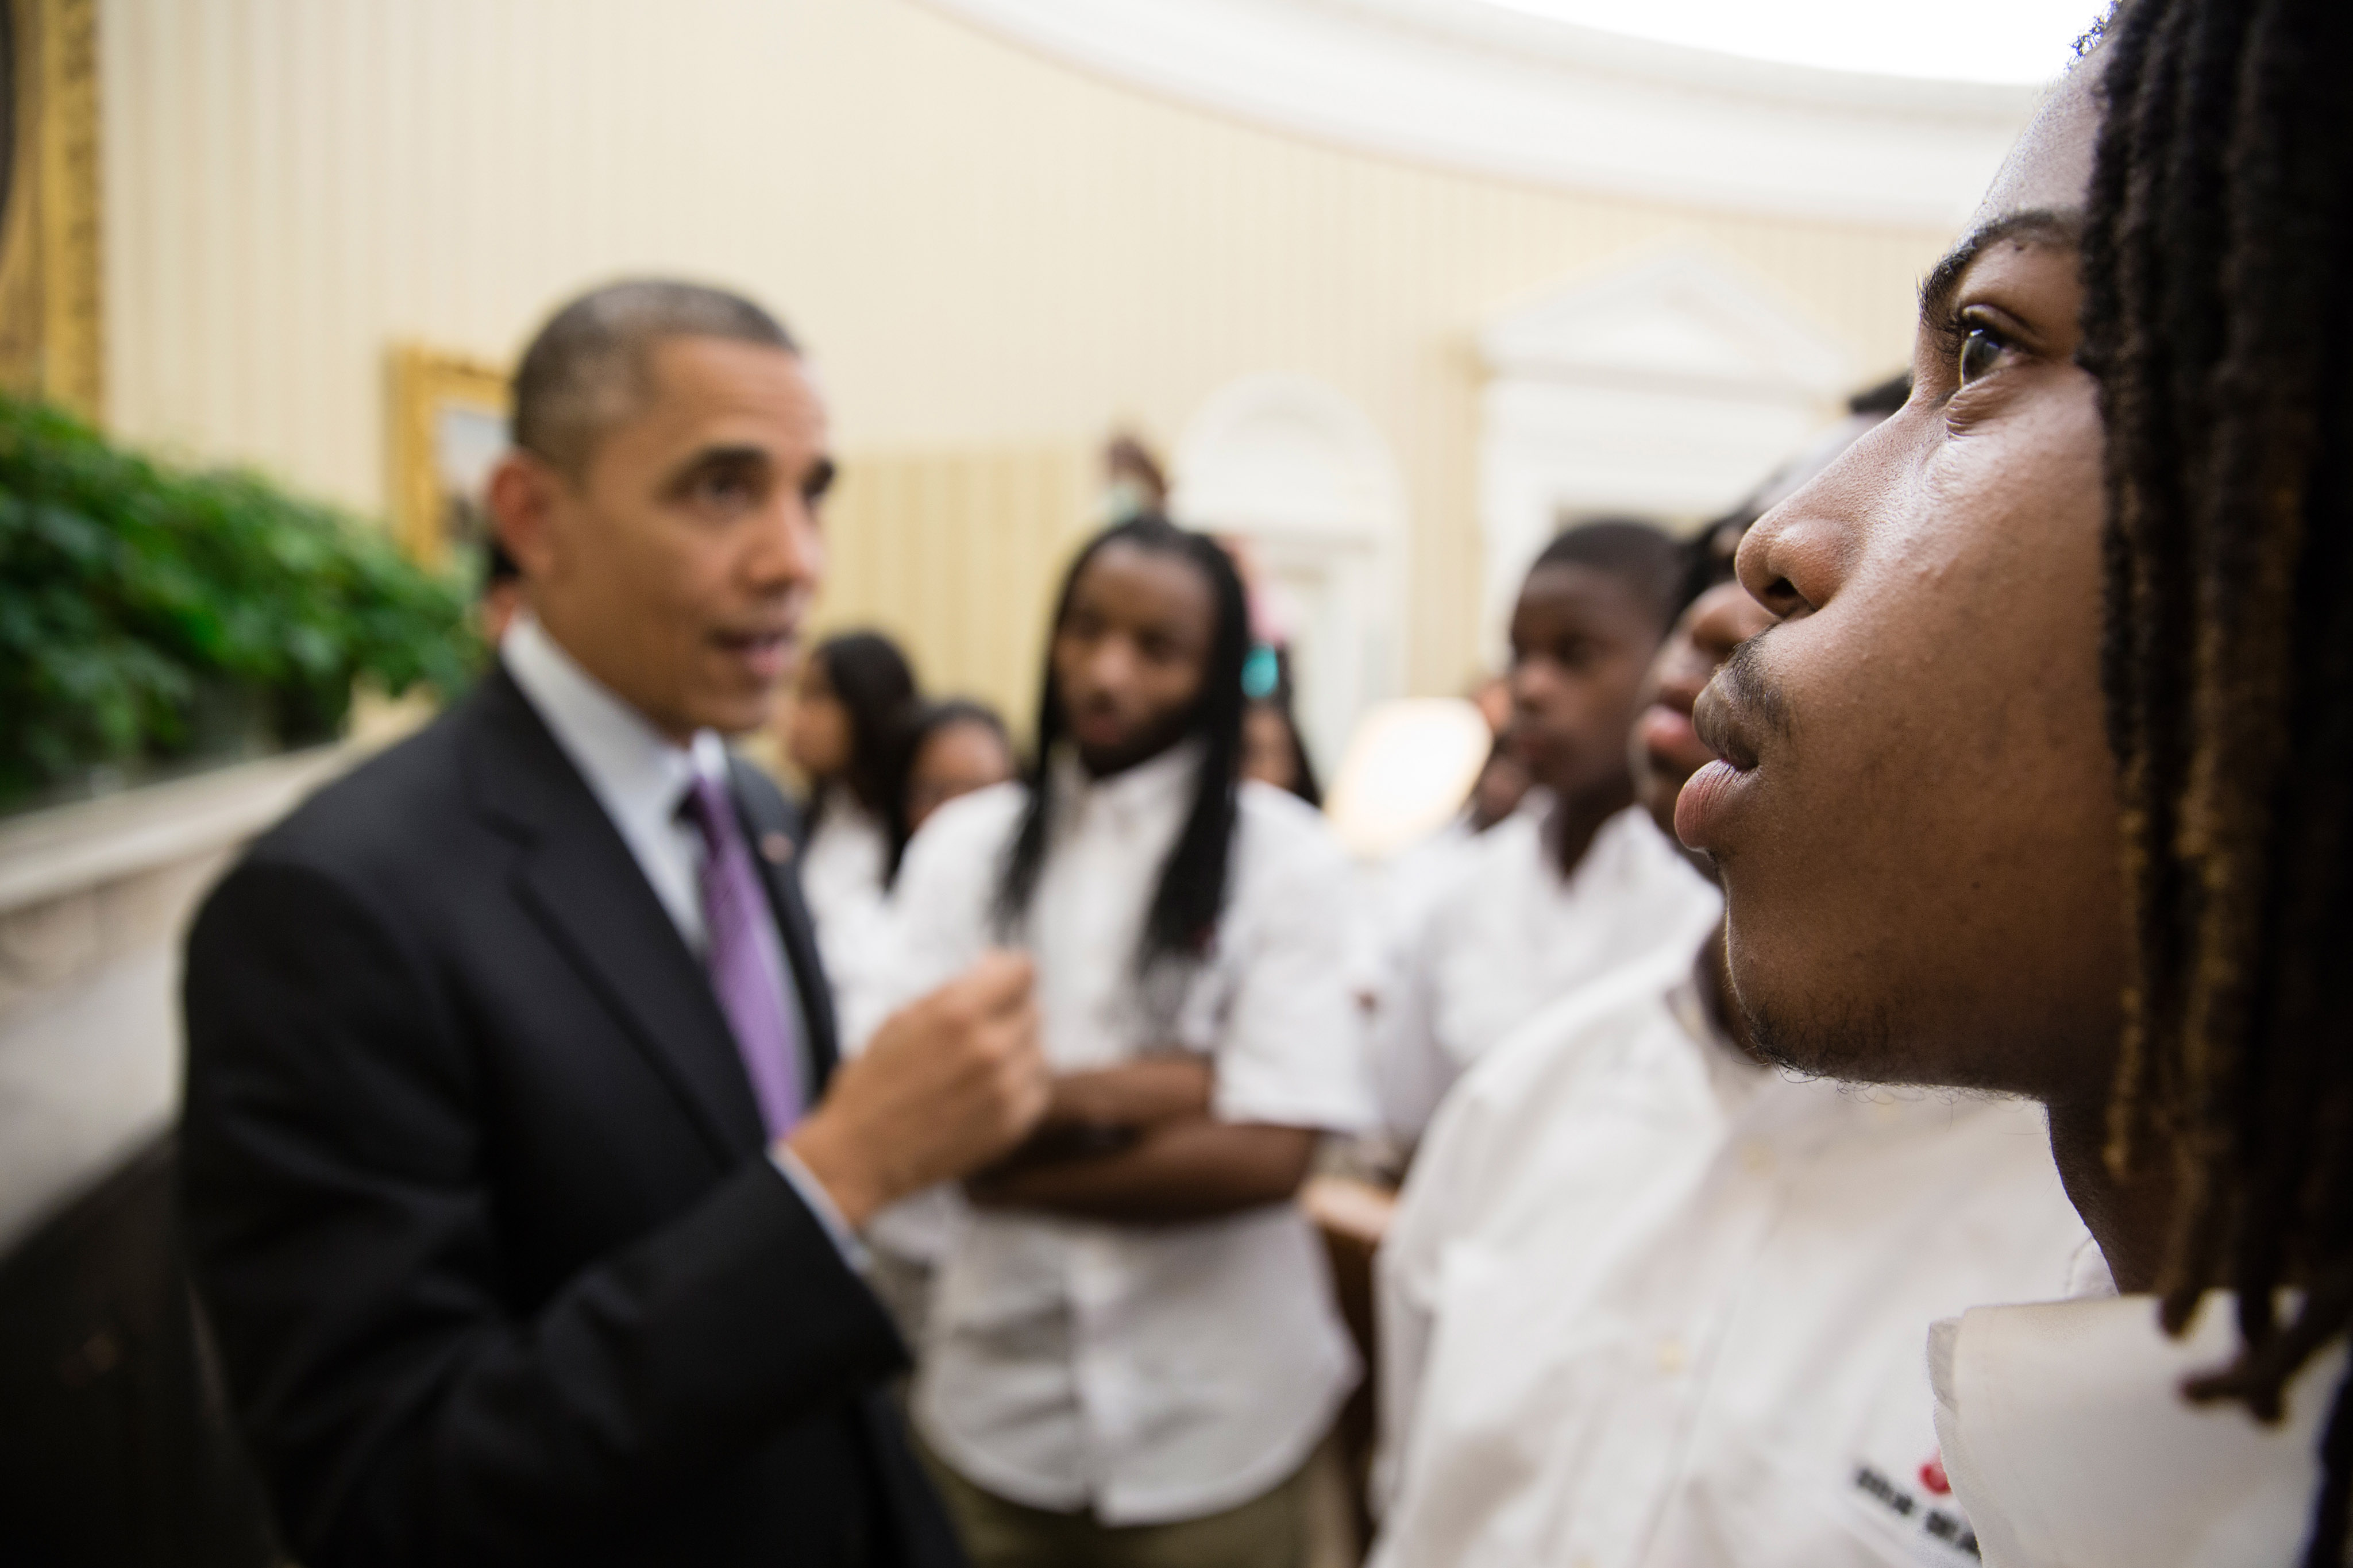 A student eyes the Emancipation Proclamation as the President gave students from William R. Harper High School in Chicago a tour of the Oval Office.